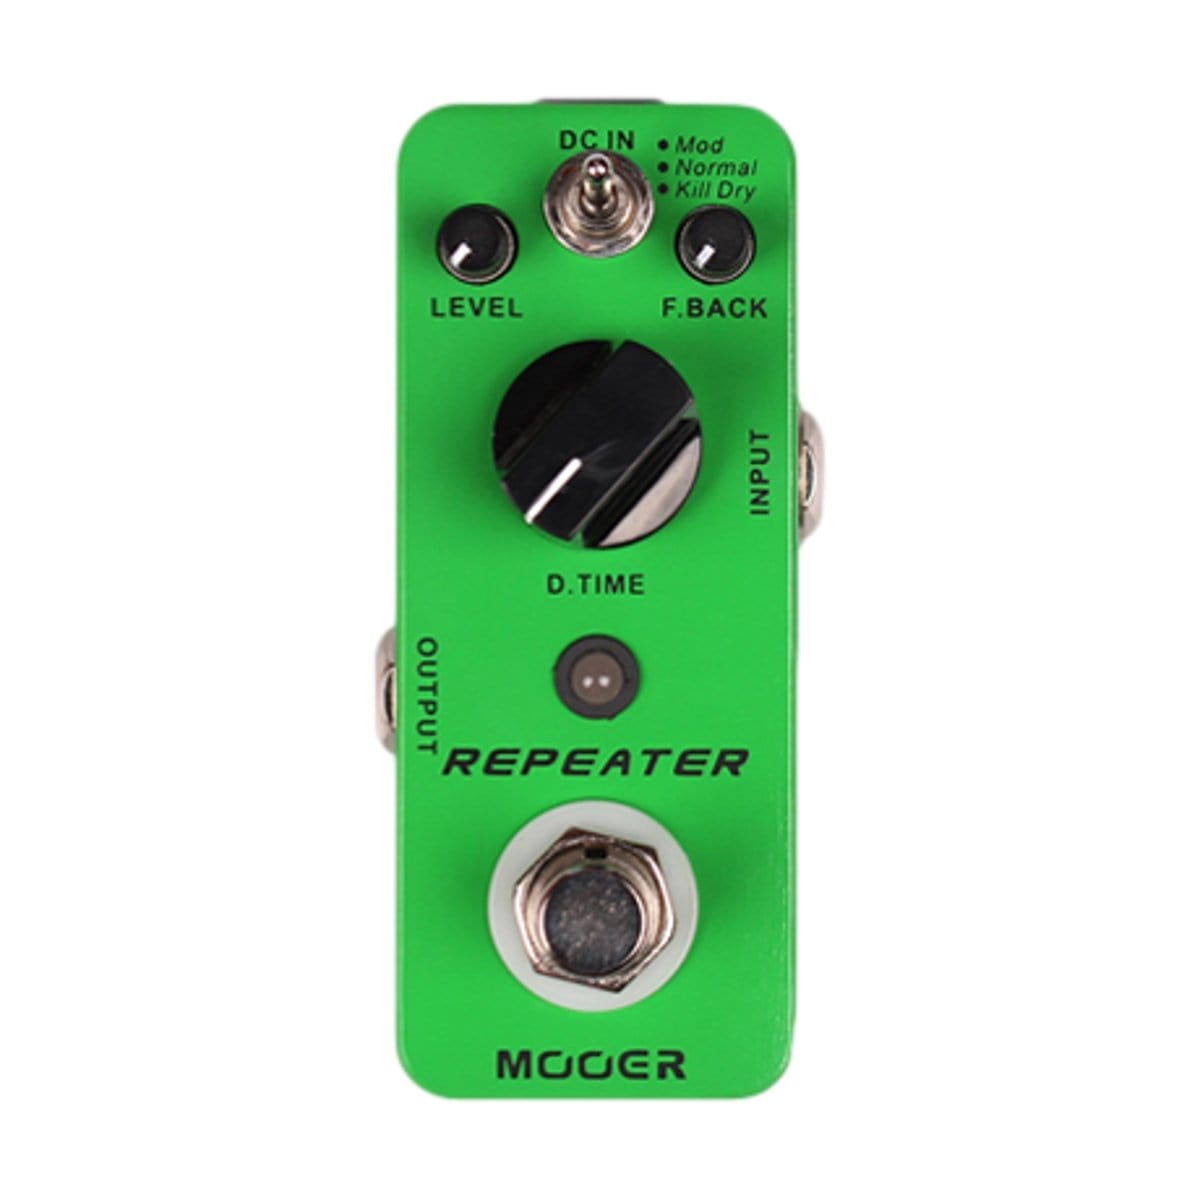 Mooer Effects Mooer Repeater Digital Delay Guitar Effects Pedal MEP-RP - Byron Music